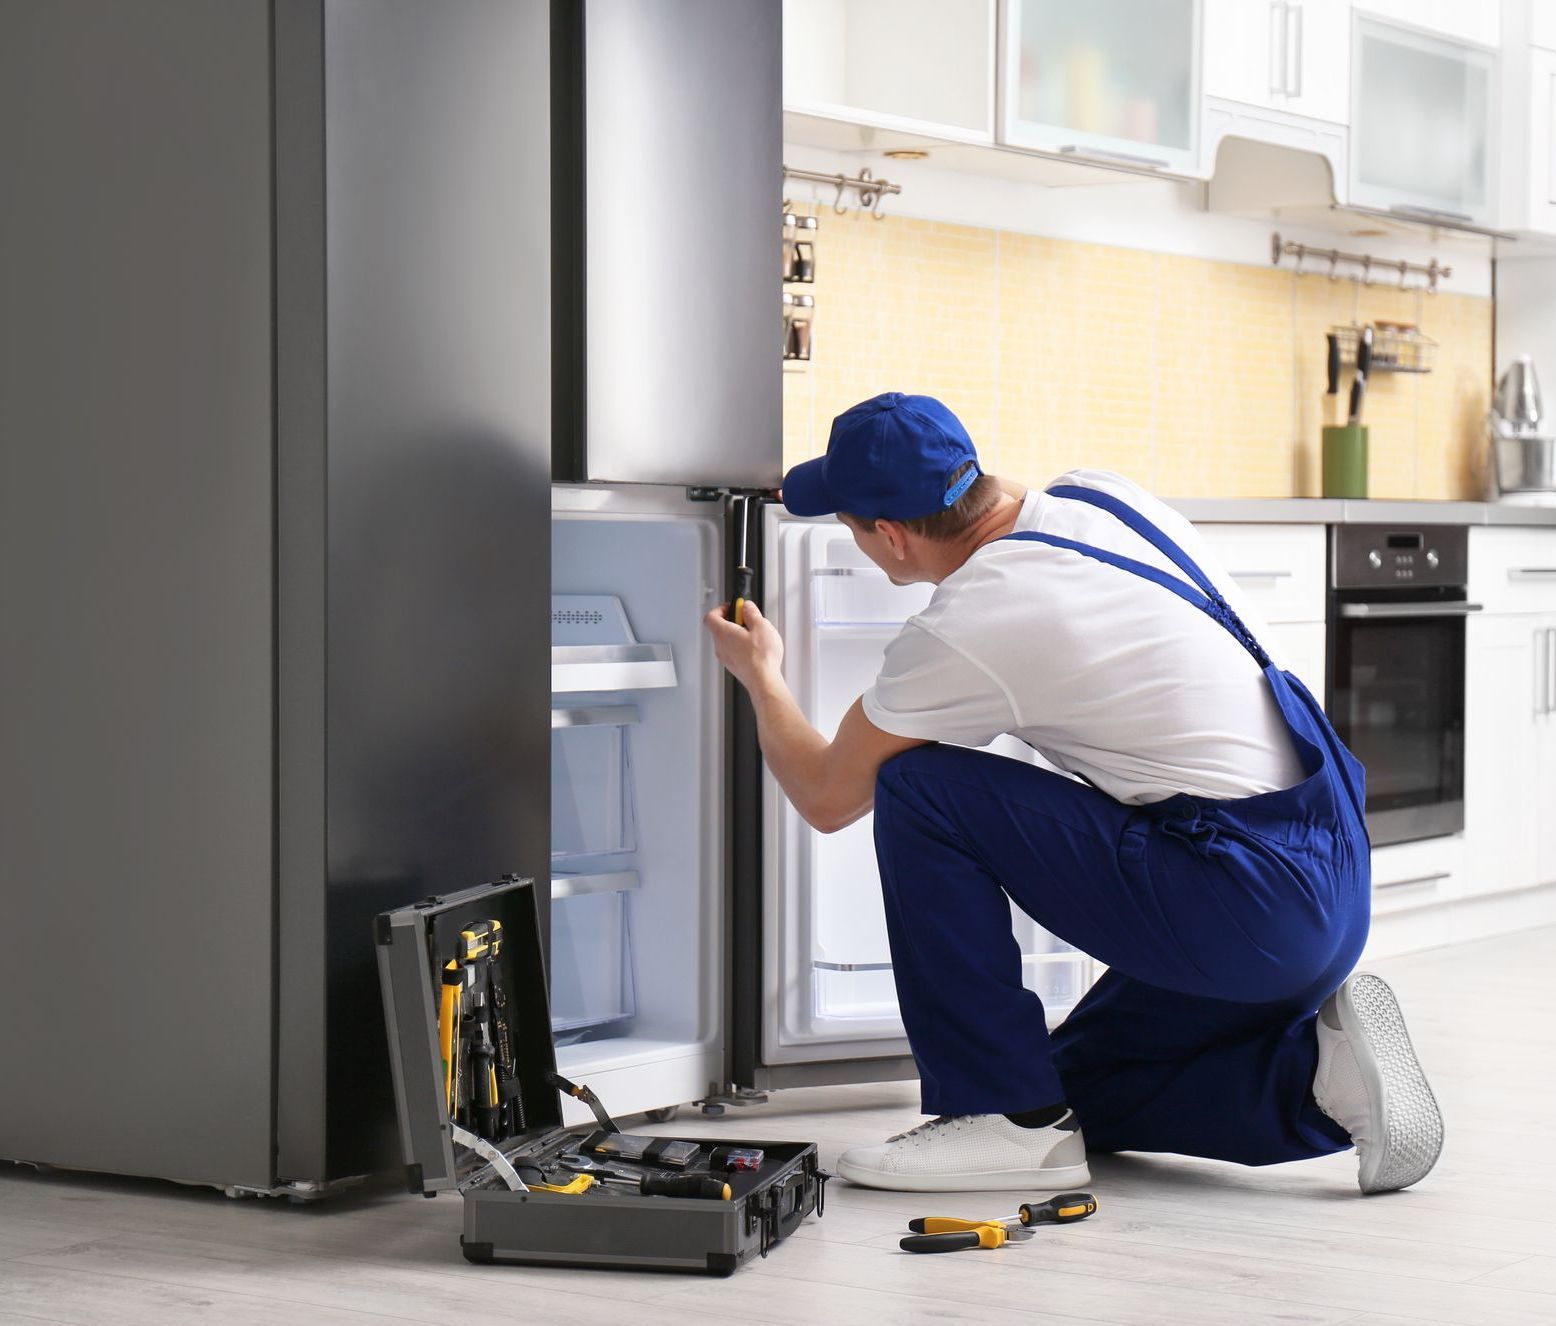 A male technician with a screwdriver is repairing a refrigerator in the kitchen.